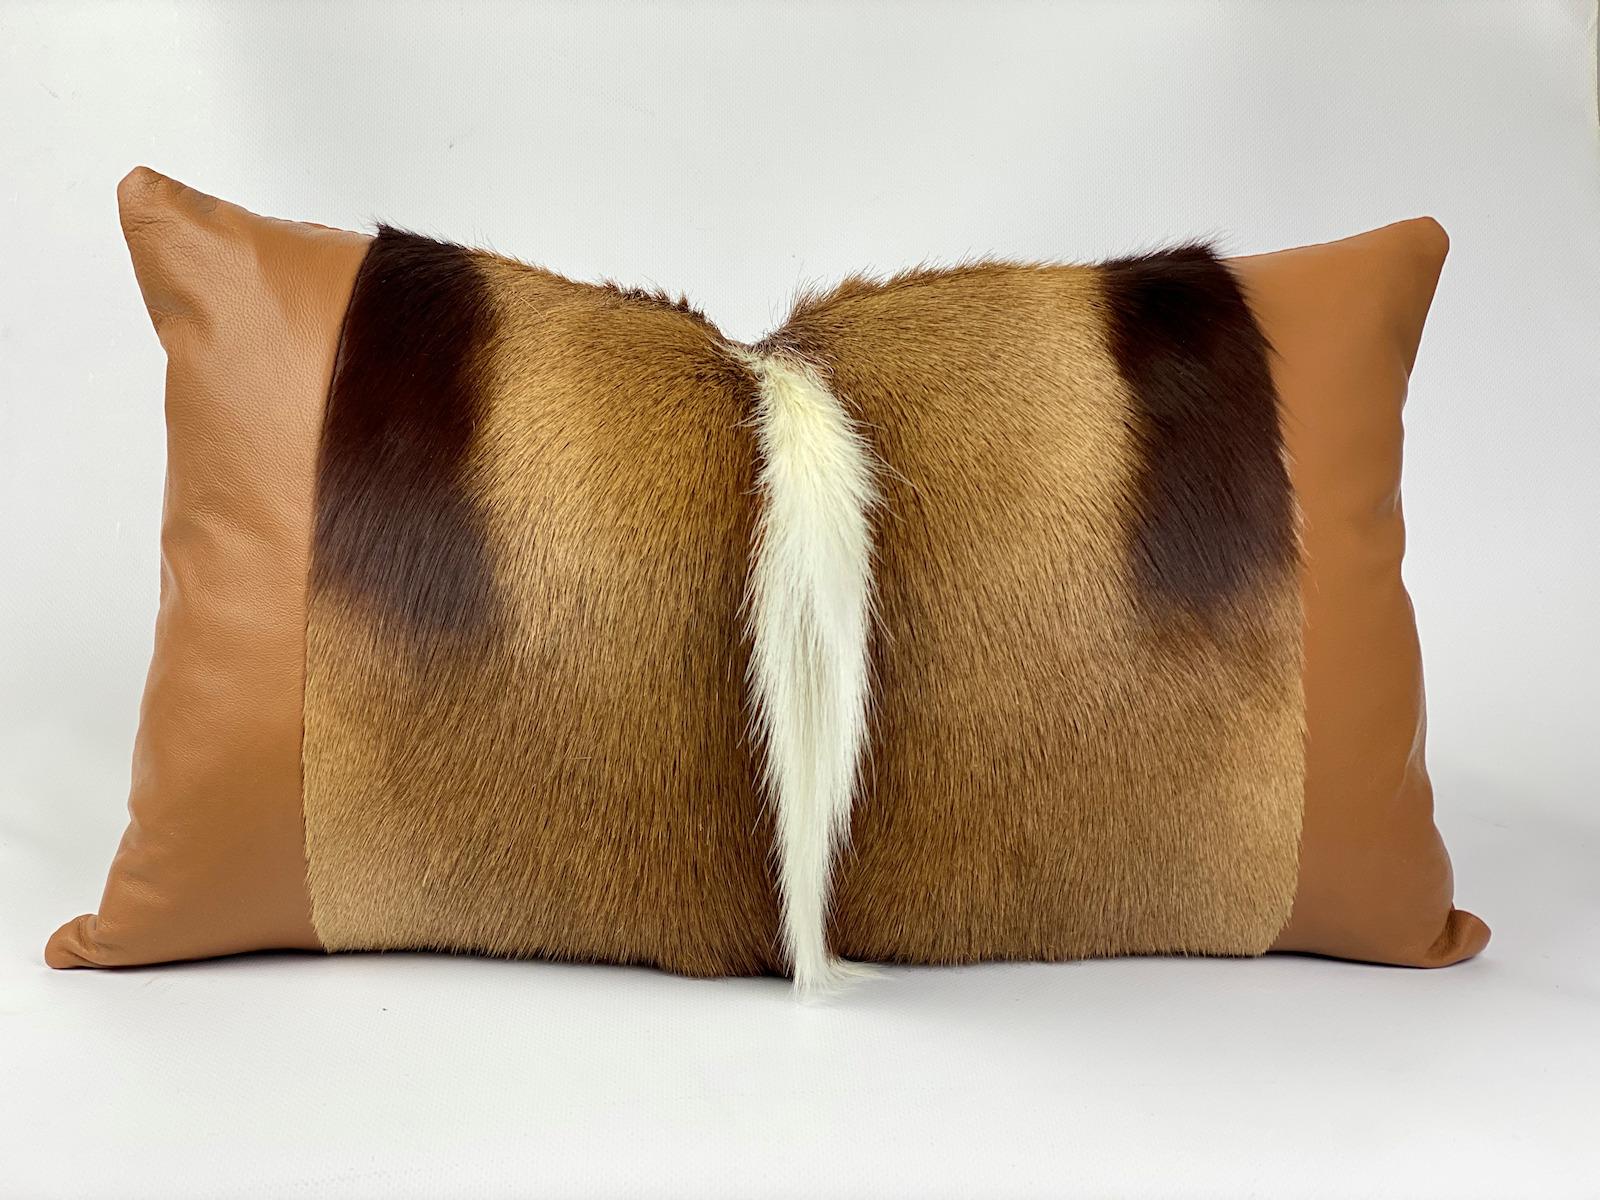 Add exotic textures to your decor with this large lumbar Springbok pillow. Australian Designer, Emily Barbara personally selects each African Springbok skin ensuring quality and softness as she captures the striking golden color tones found in each